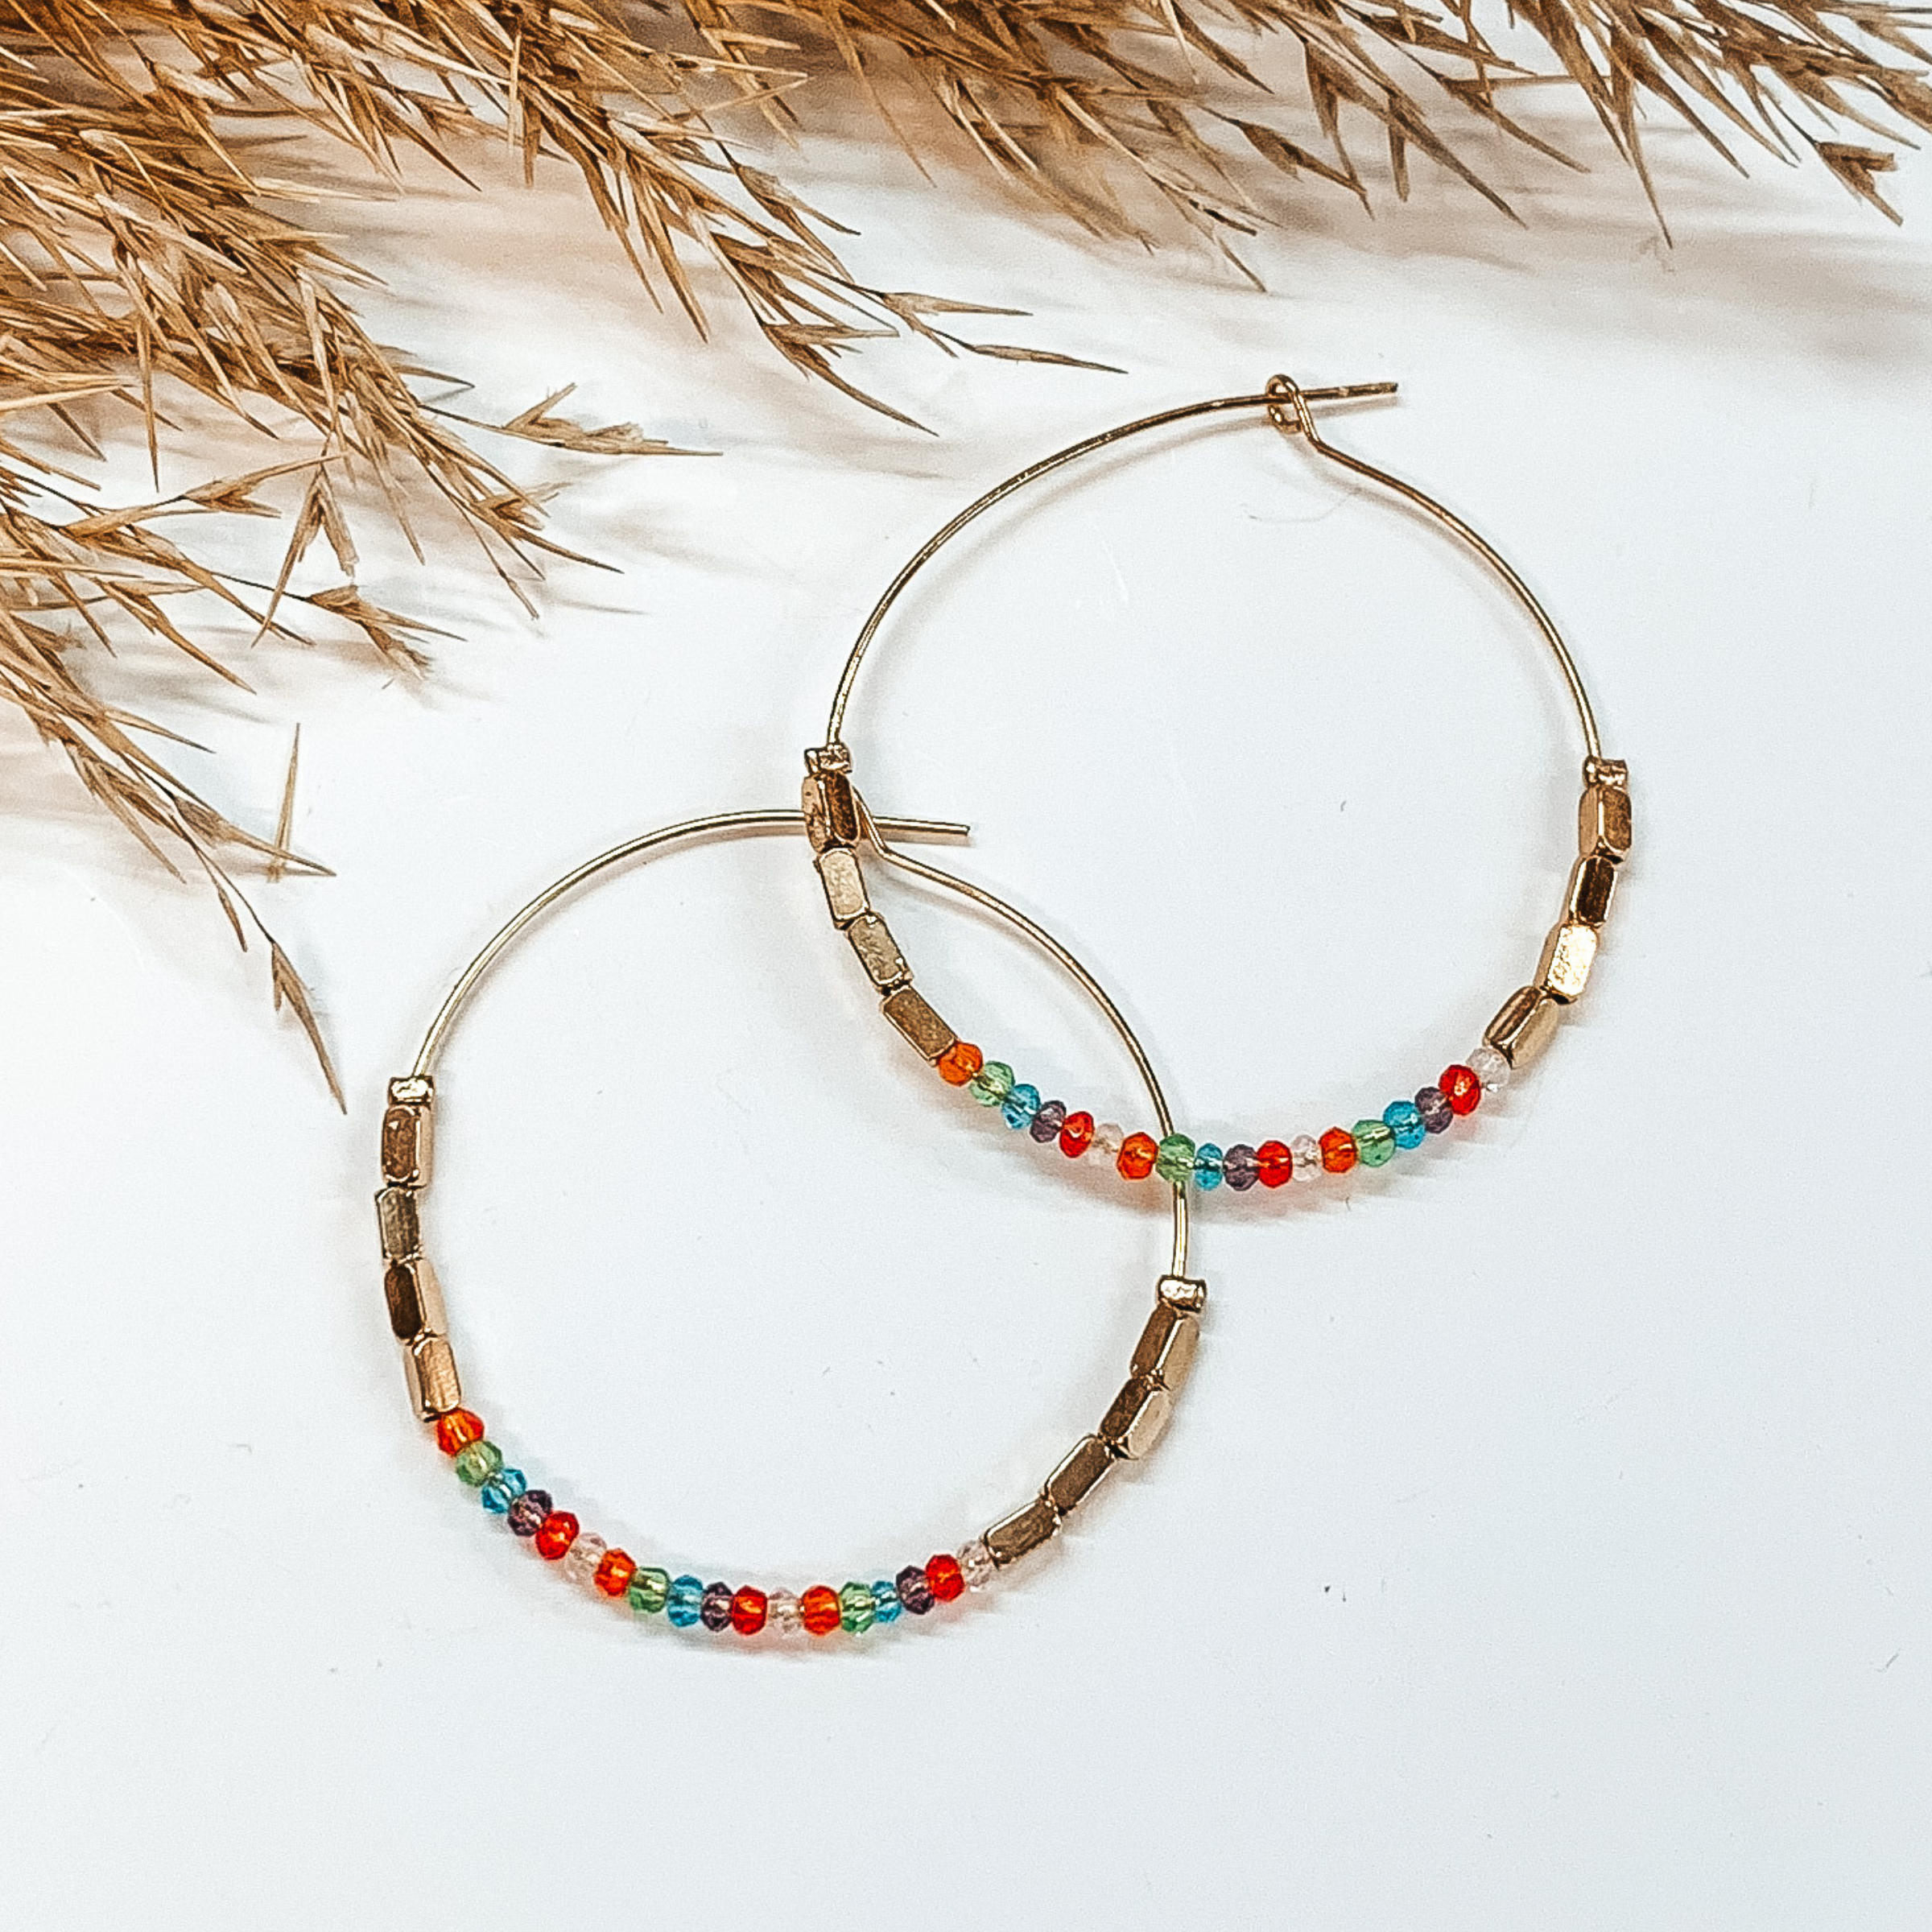 Gold hoops with multicolored beads in the bottom  part with four long gold beads on each side.  Multicolored beads in orange, green, turquoise,  purple, red, and clear. Taken in a white  background with a brown plant as decor.